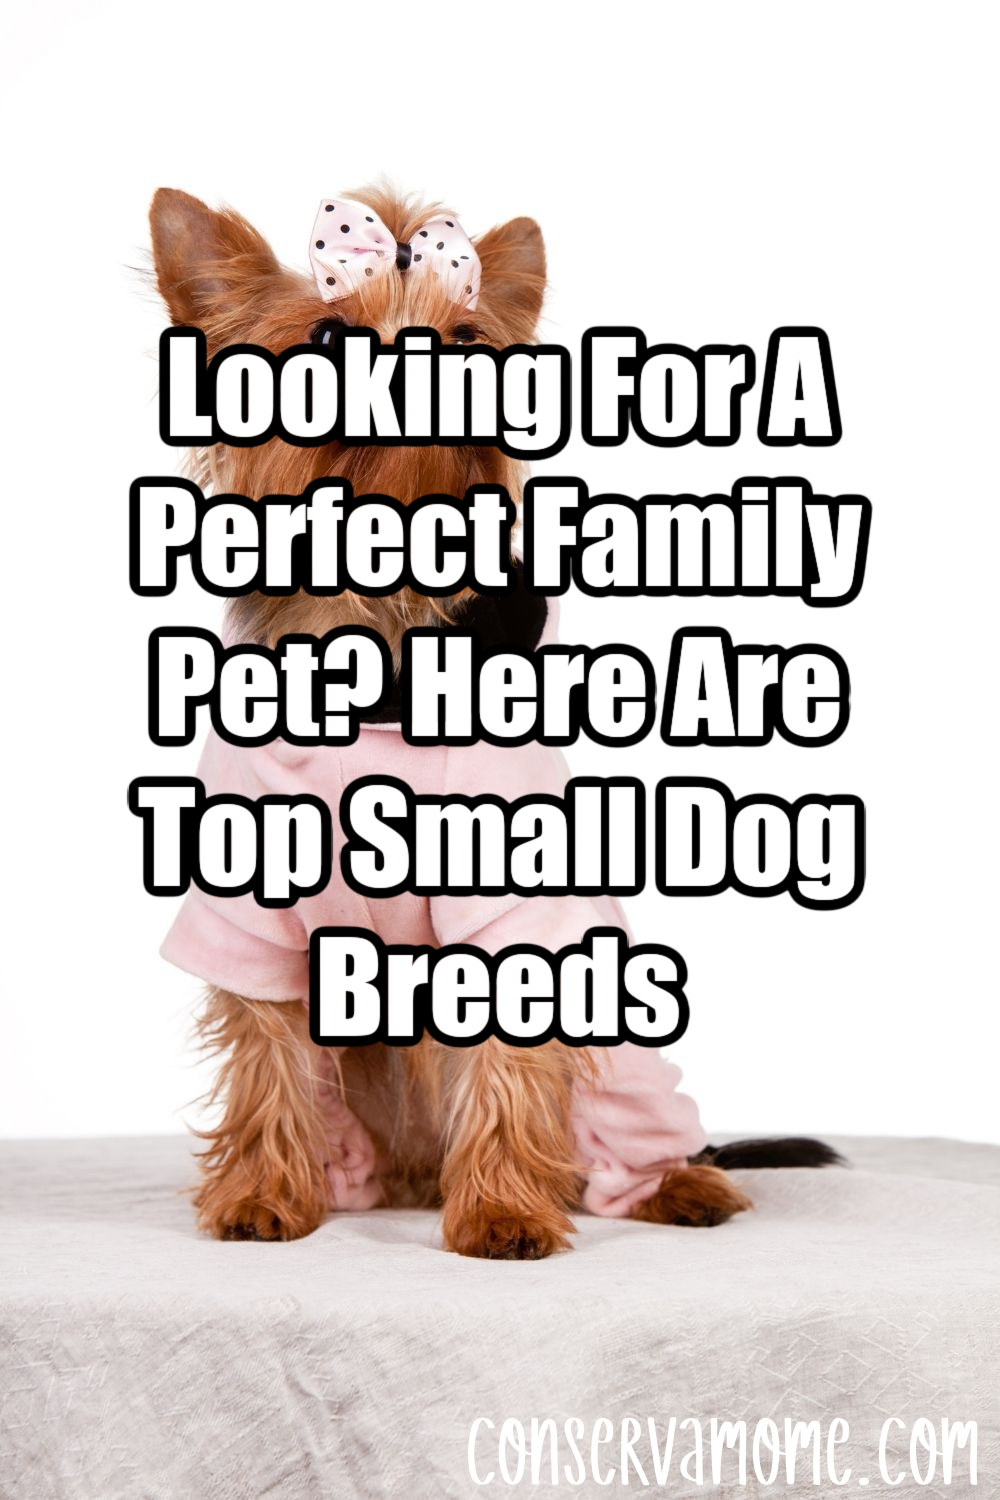 Looking For A Perfect Family Pet? Here Are Top Small Dog Breeds